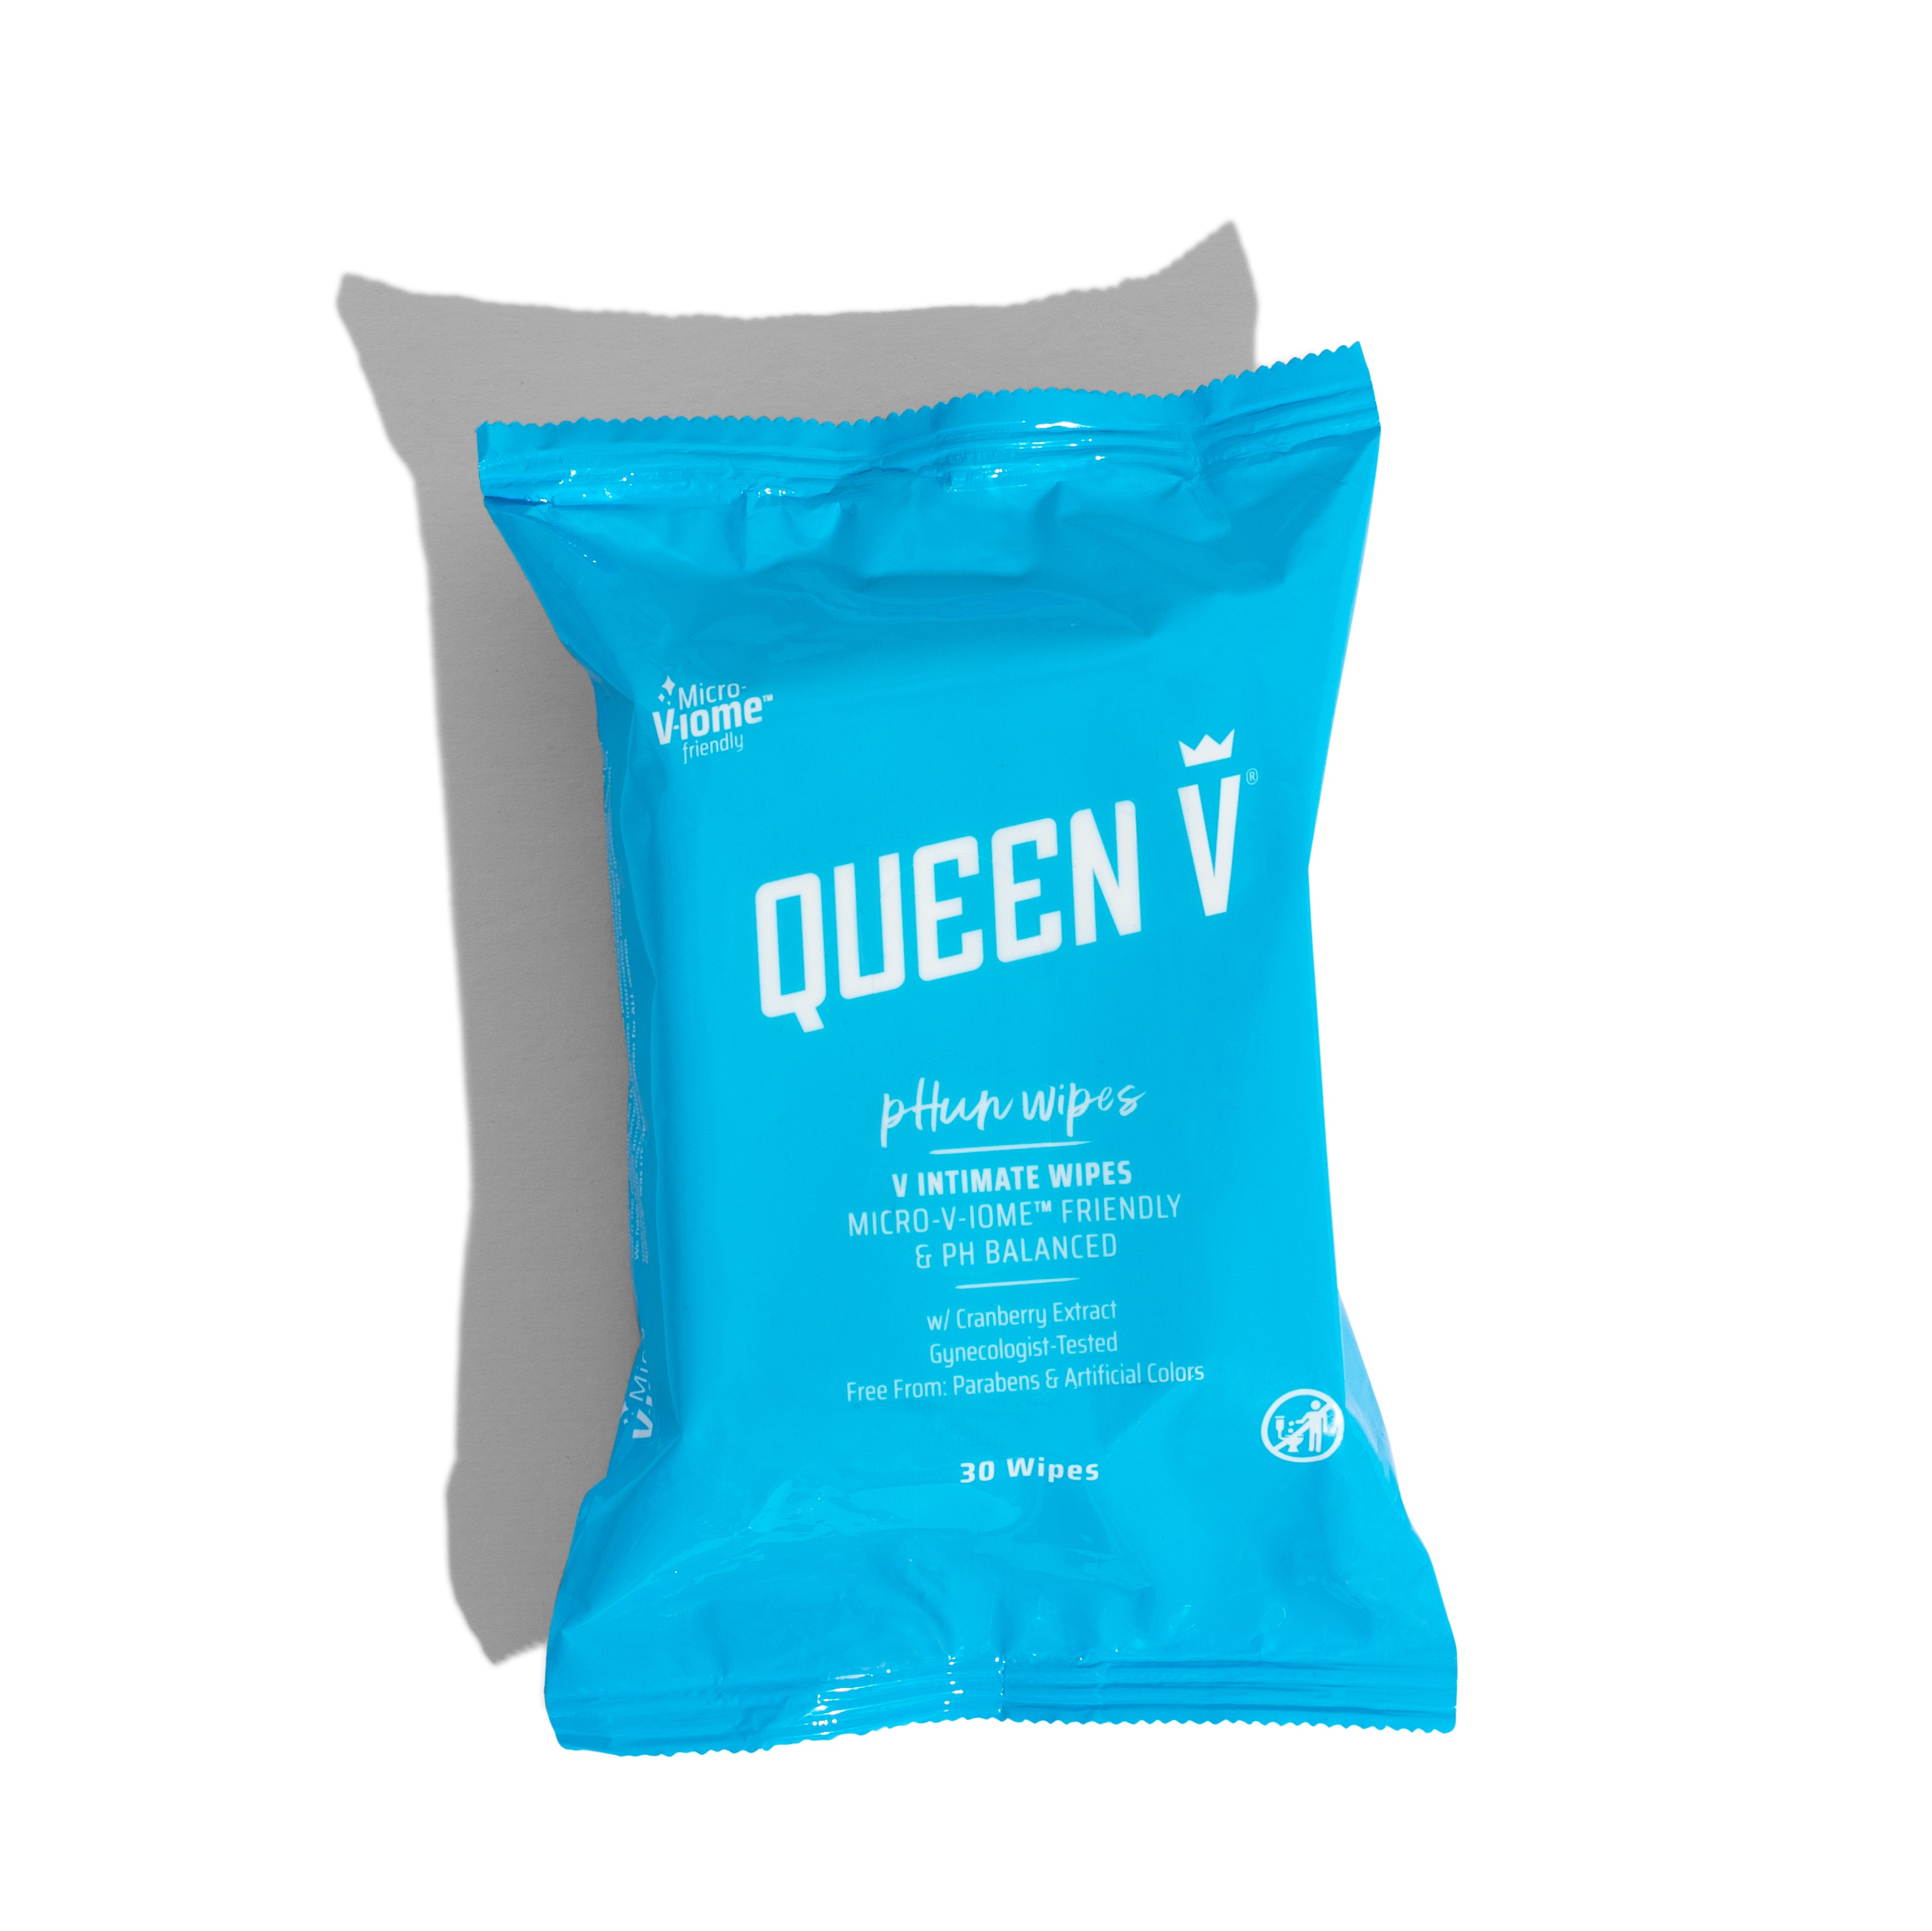 QUEEN V® pHun Wipes - Intimate Wipes